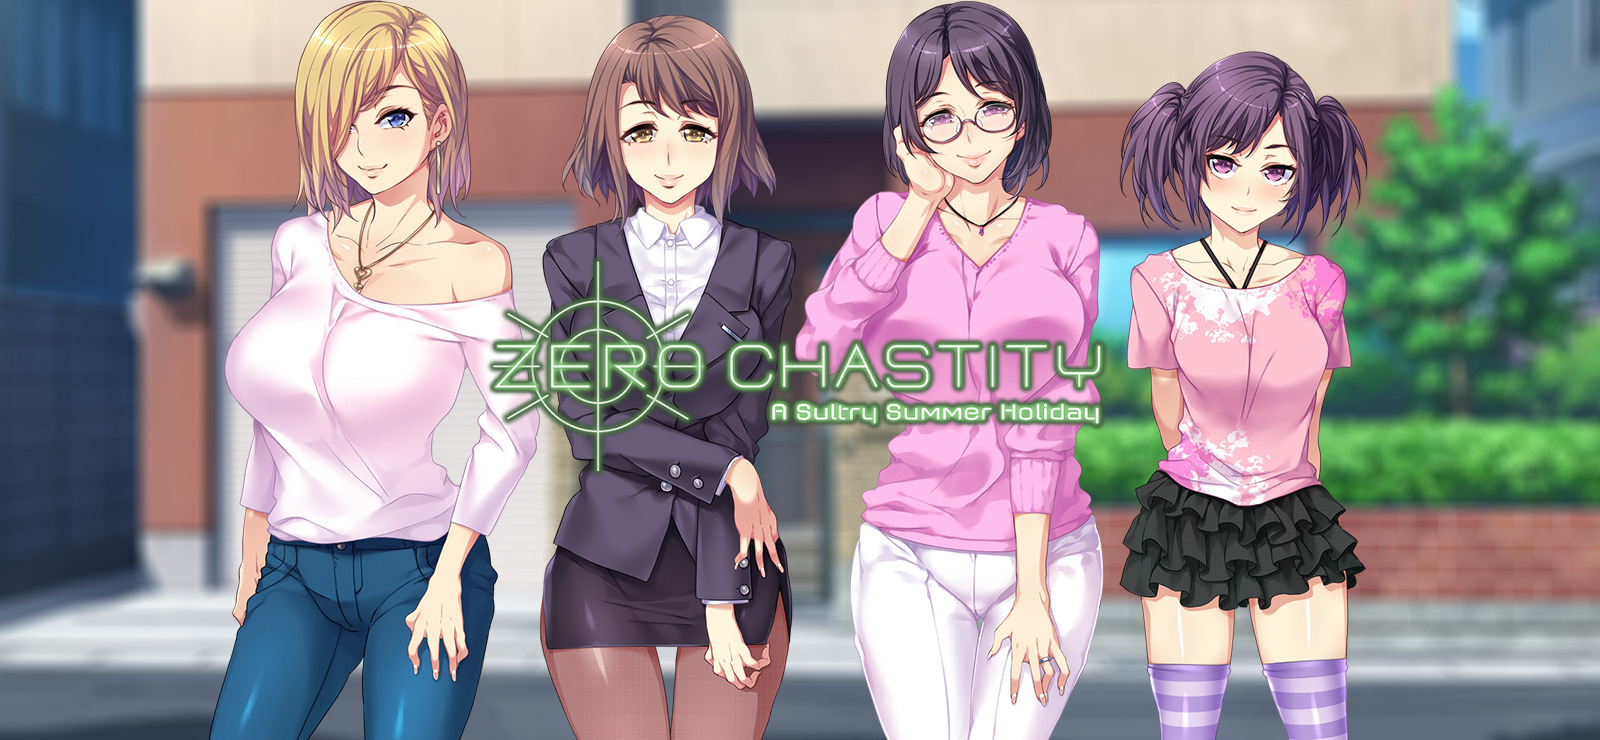 Zero chastity a sultry summer holiday patch